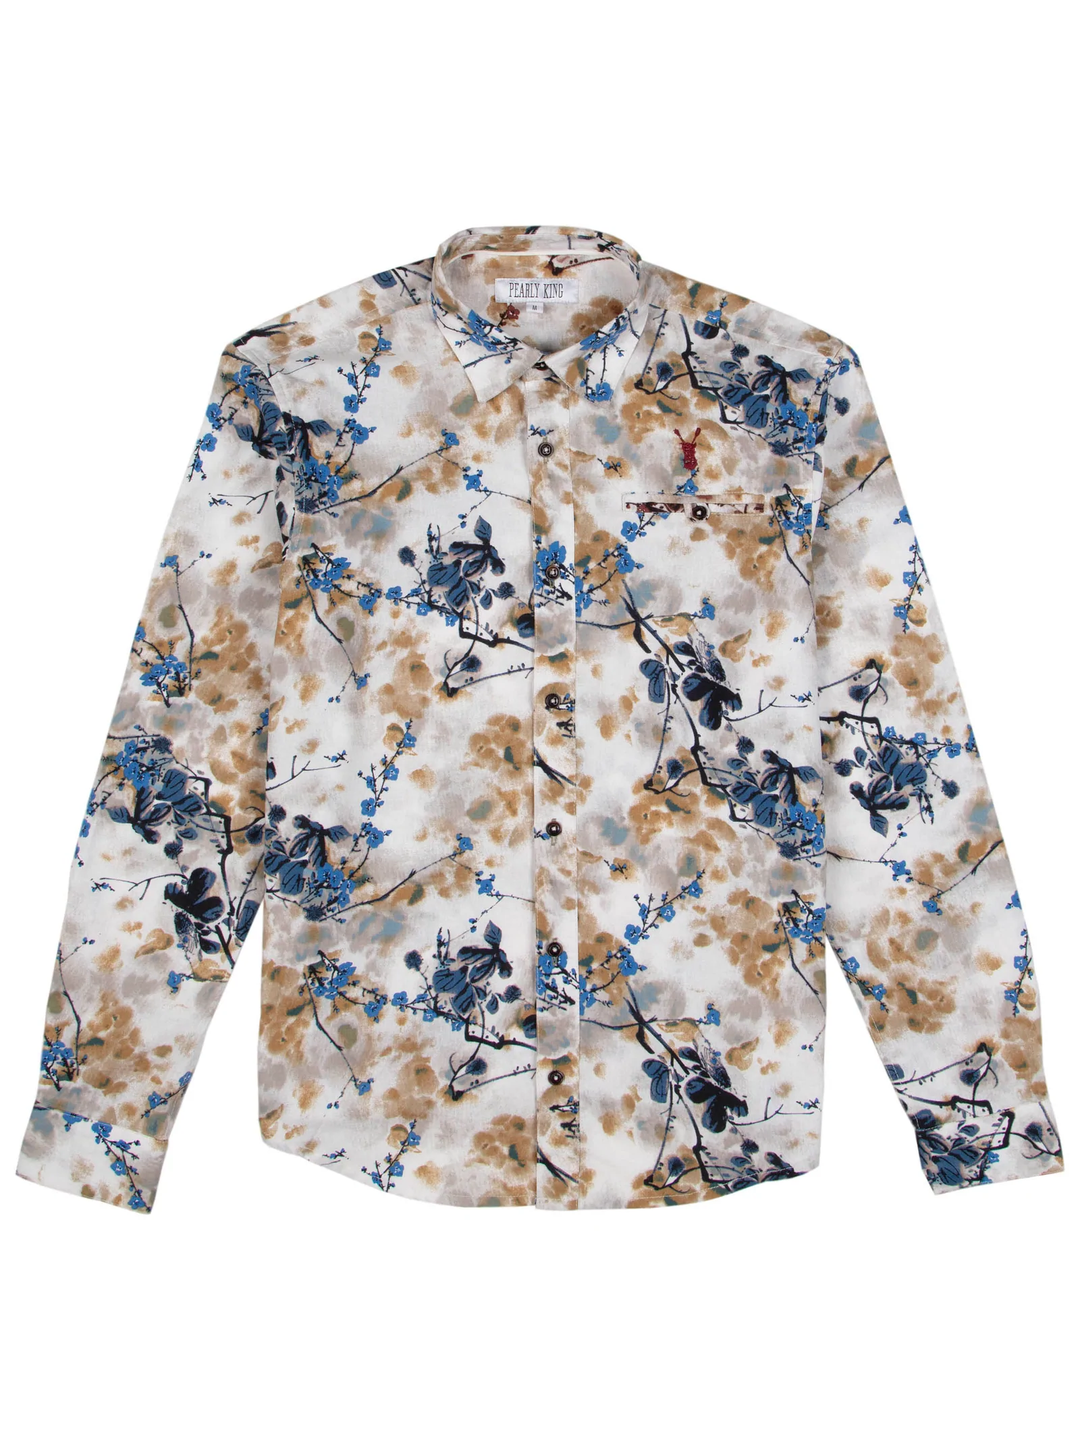 Pearly King - Bloom Long Sleeve Shirt in Blue | Buster McGee